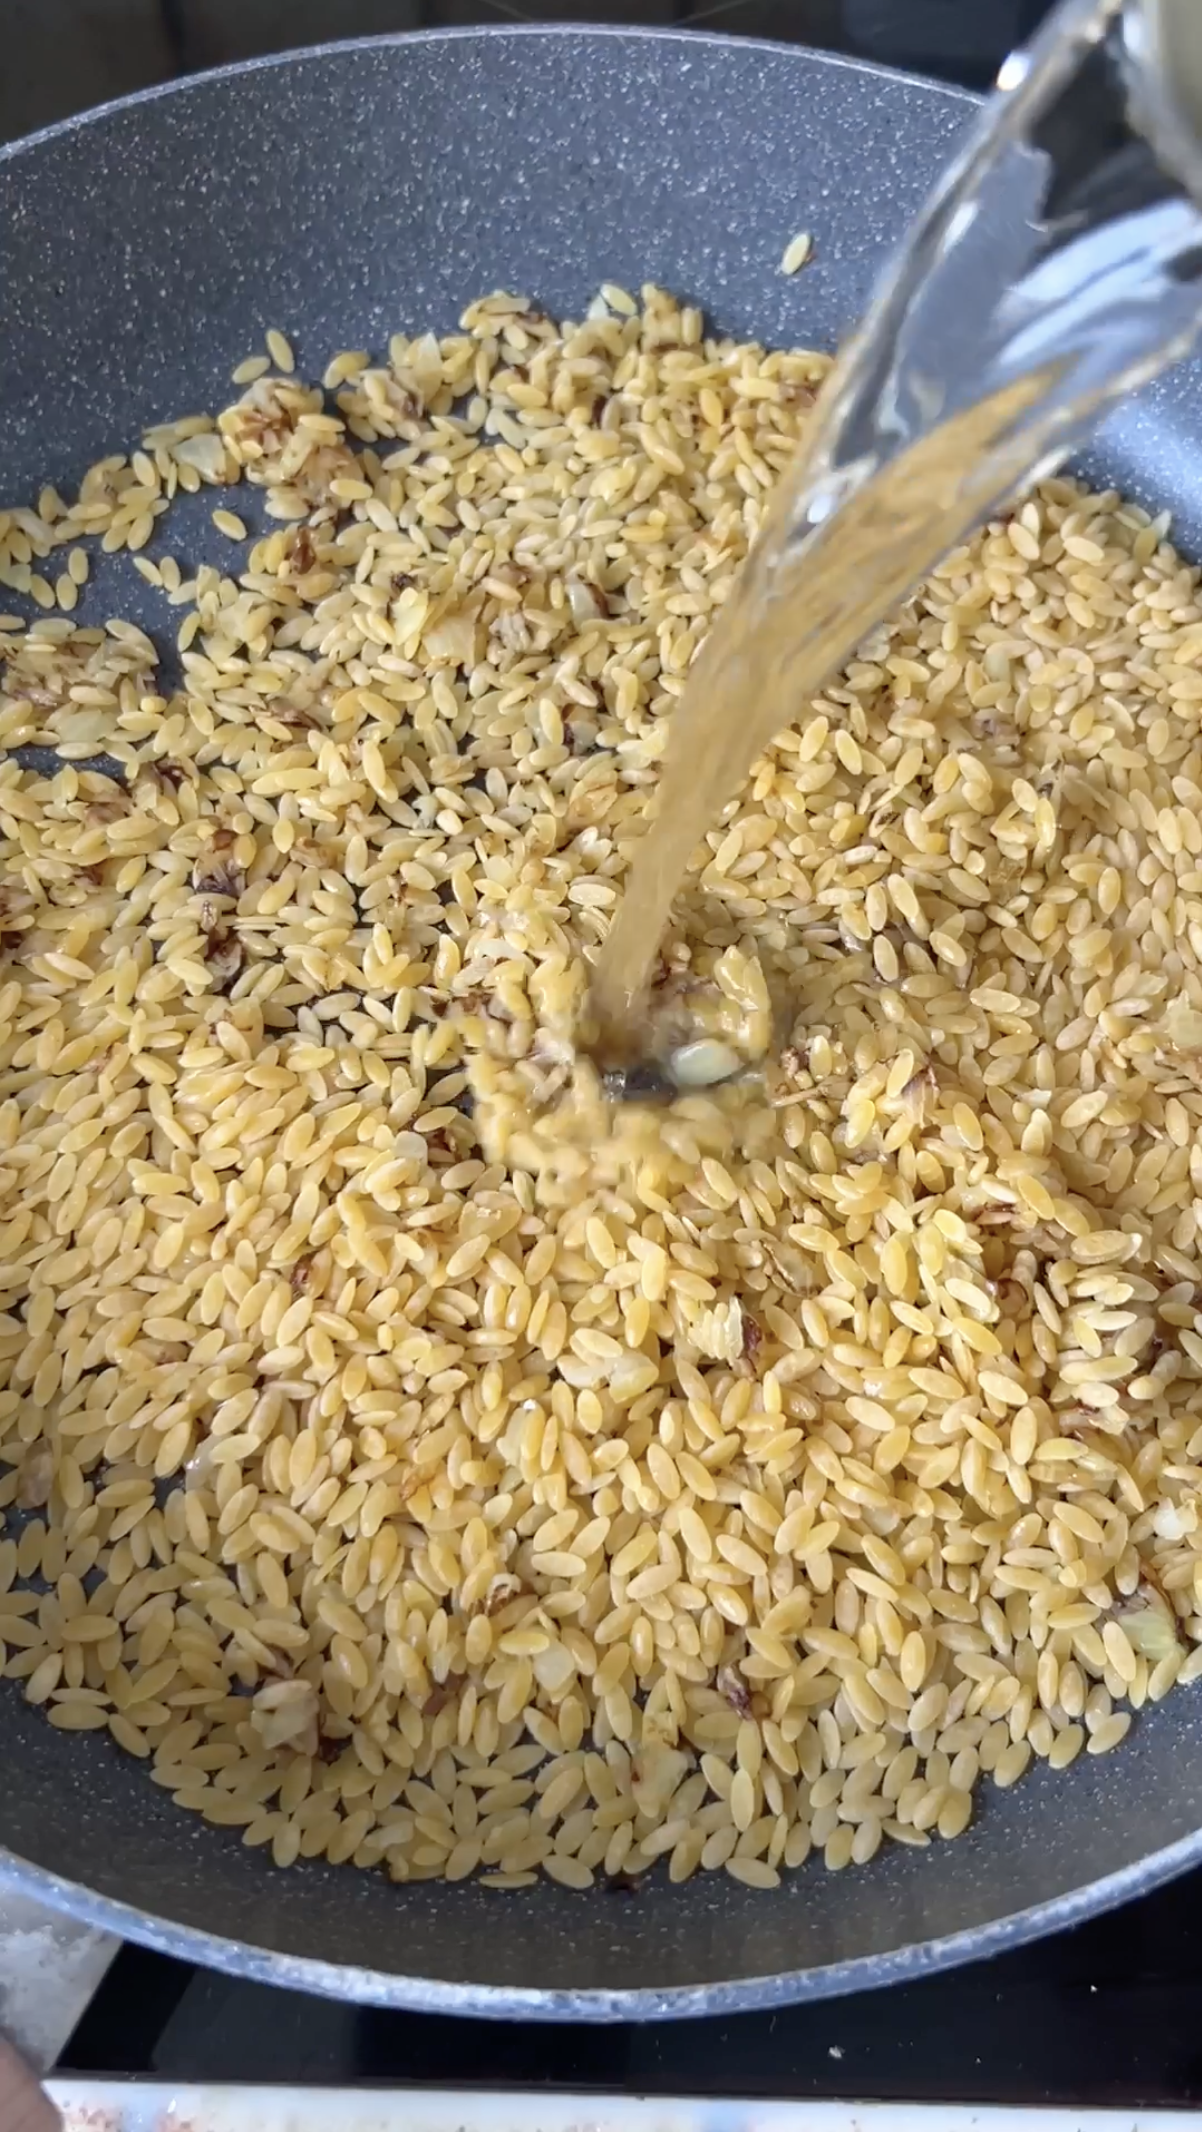 Orzo pasta cooking in the pan with stock falling in.